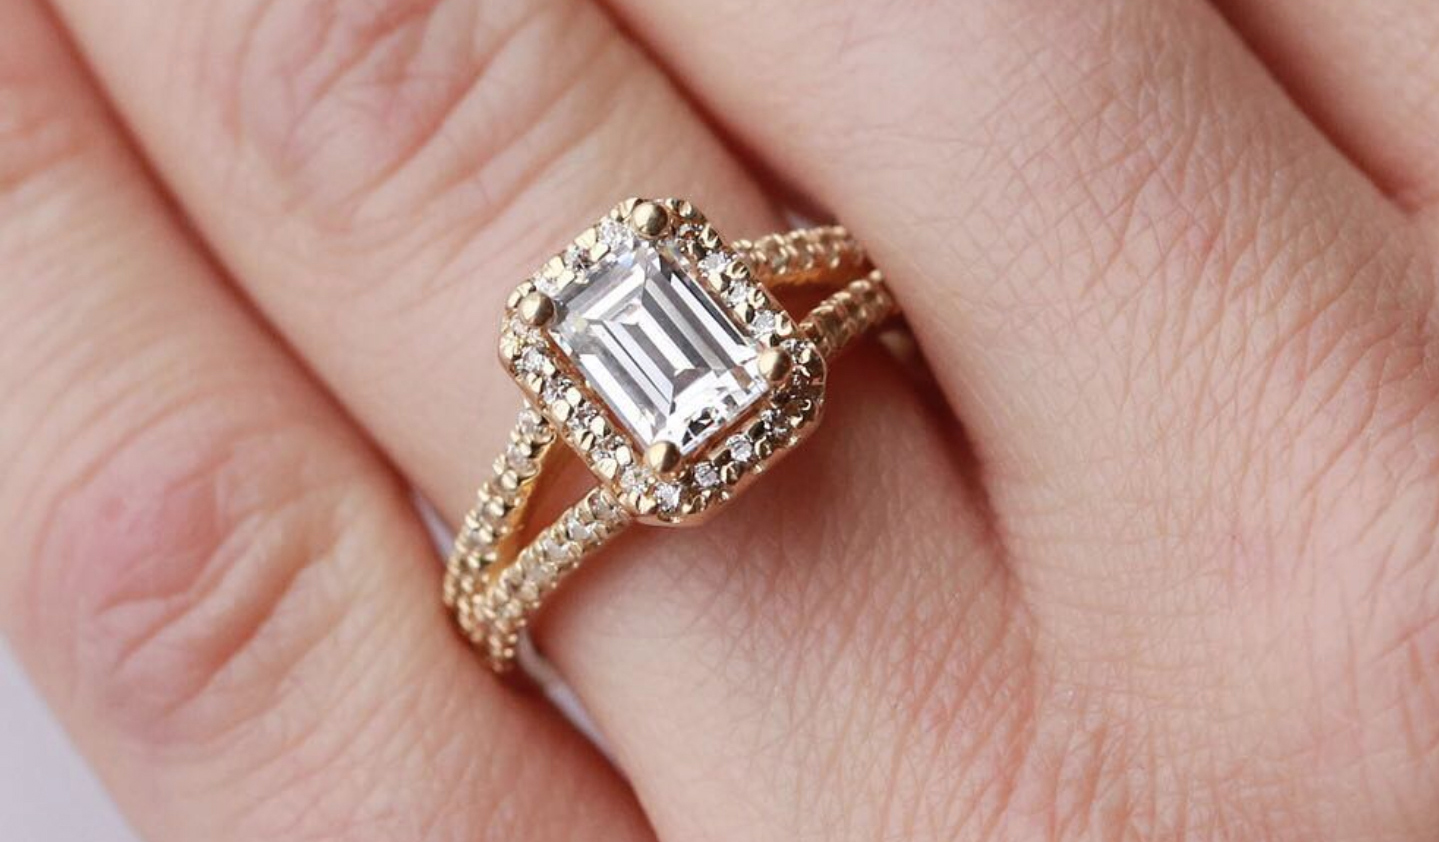  A Diamond Nexus halo Emerald cut engagement ring in yellow gold.